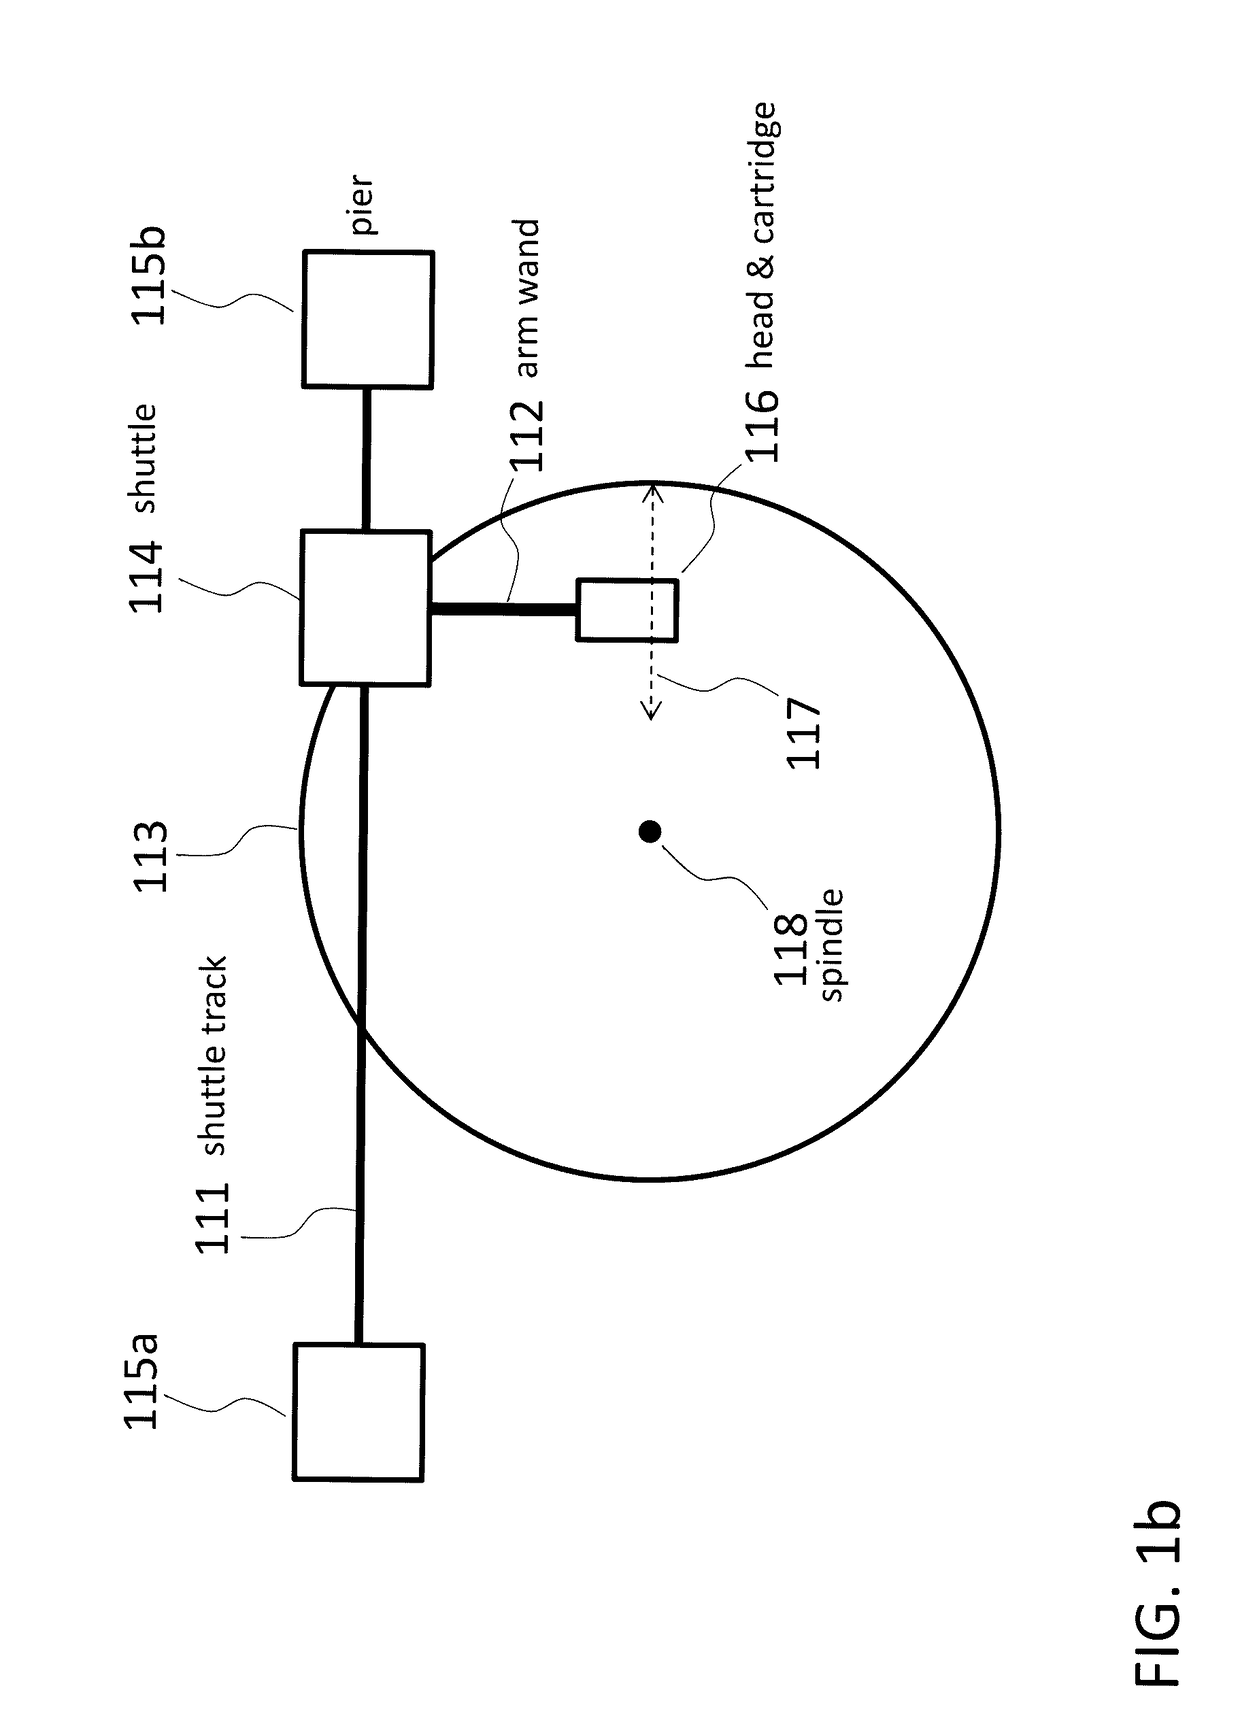 Systems and methods for reducing audio distortion during playback of phonograph records using multiple tonearm geometries